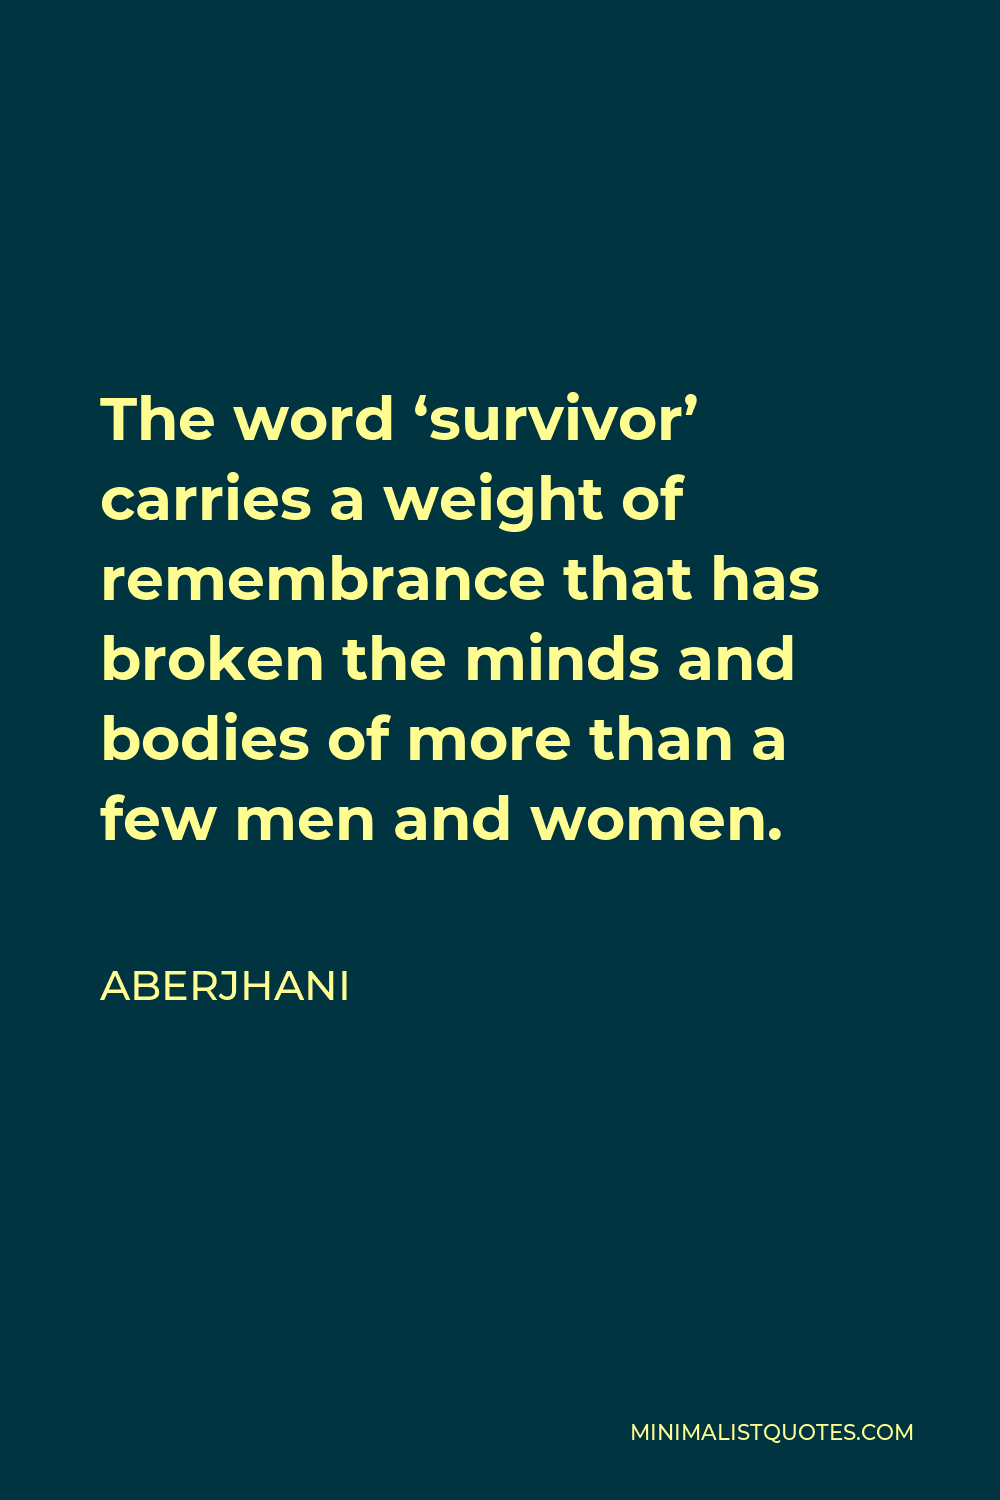 Aberjhani Quote - The word ‘survivor’ carries a weight of remembrance that has broken the minds and bodies of more than a few men and women.